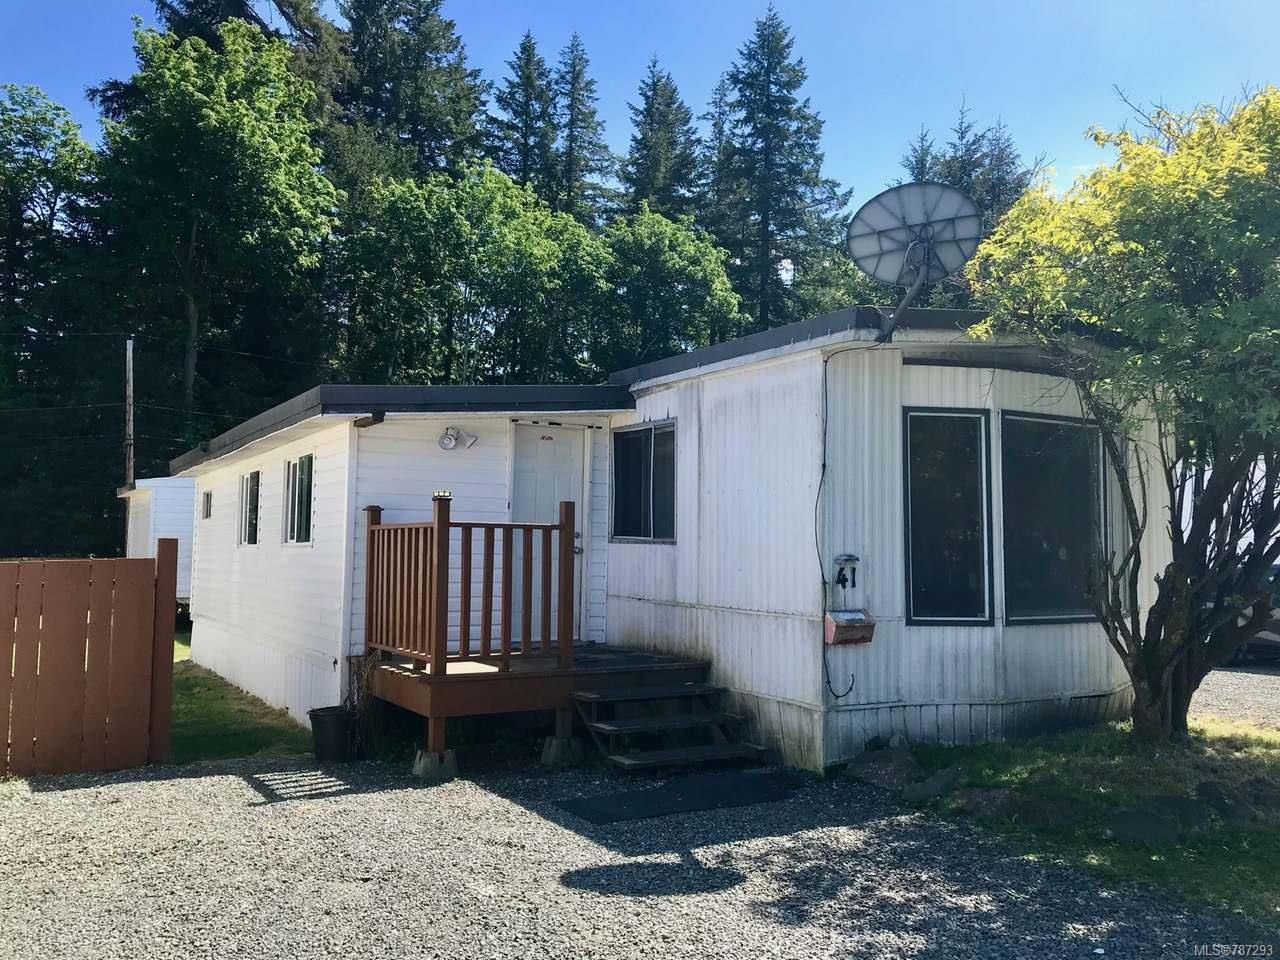 I have sold a property at 41 2700 Woodburn Rd in CAMPBELL RIVER
